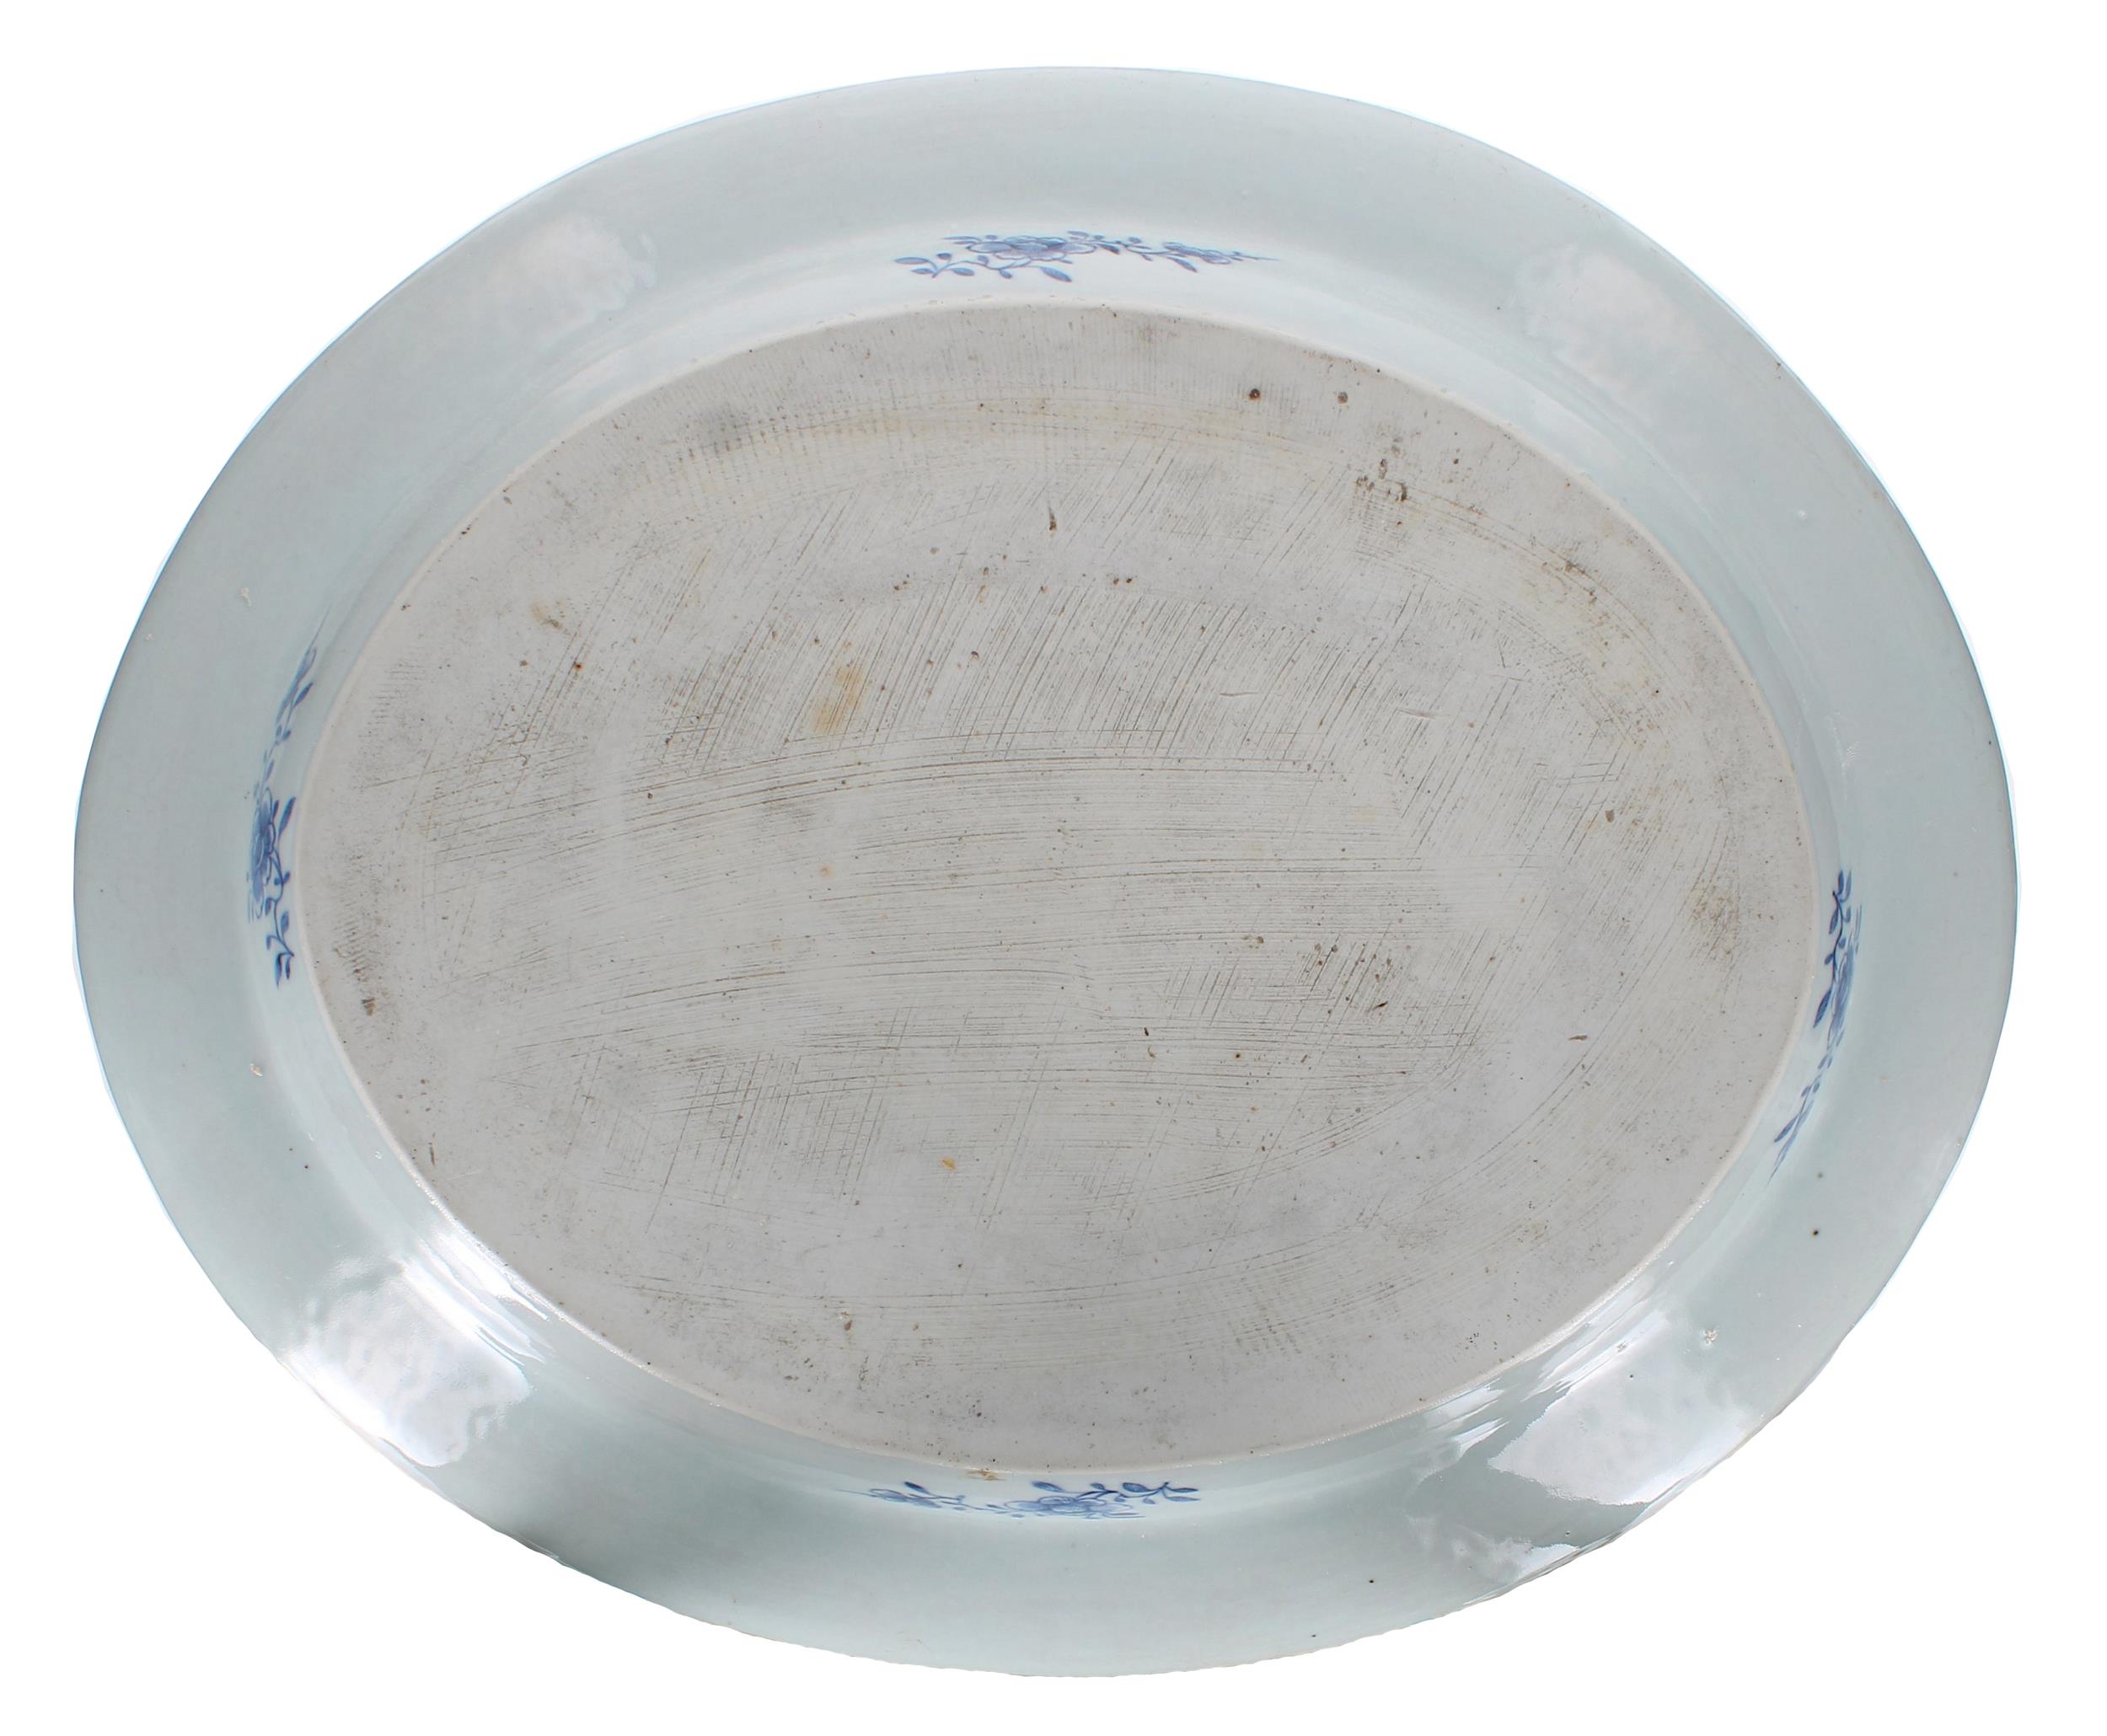 Chinese export blue and white porcelain oval tureen and cover, decorated with pagoda landscapes, 11" - Image 3 of 7